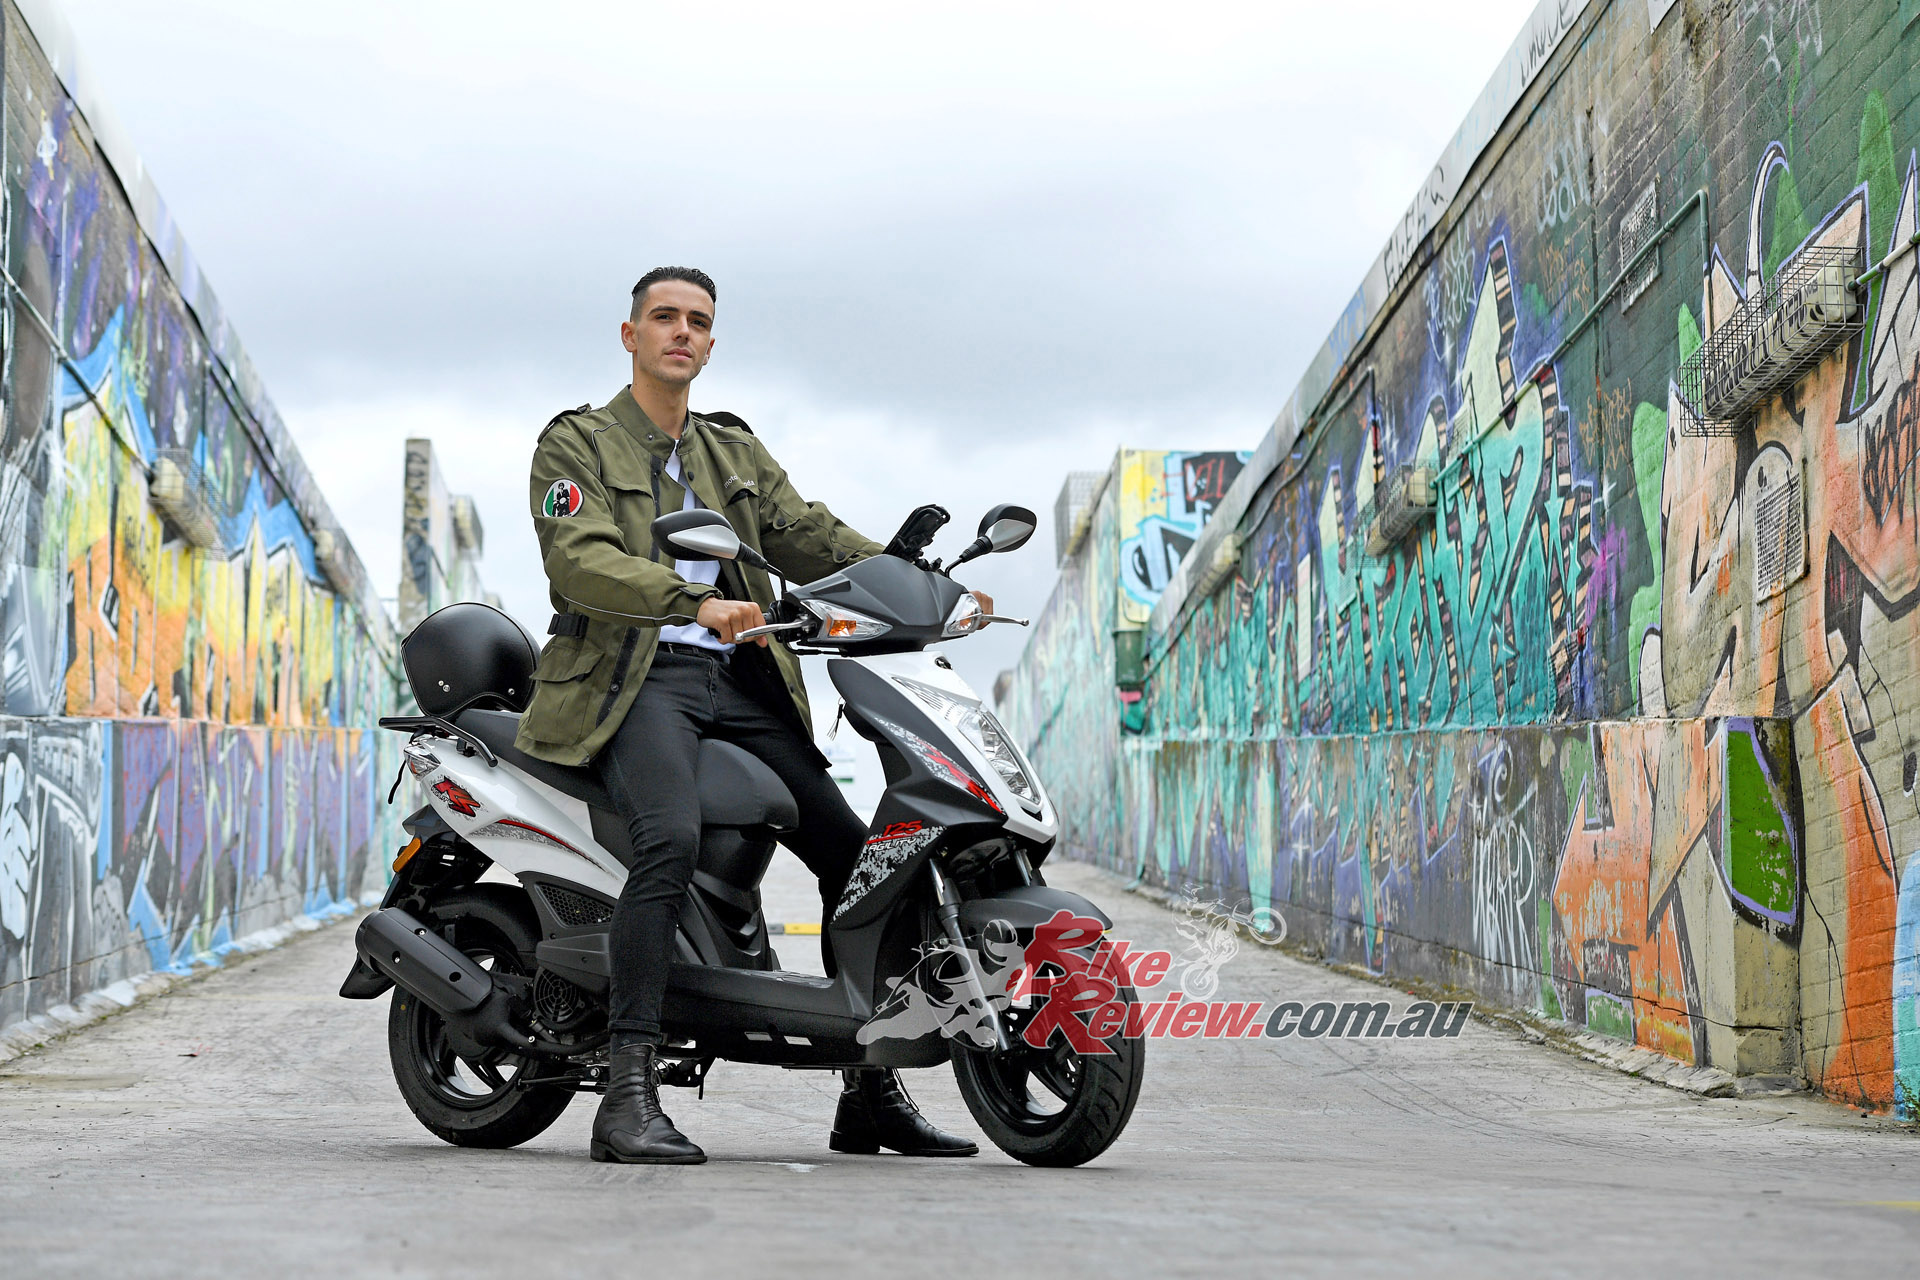 Memorizar Colaborar con Obsesión The 2020 KYMCO Agility RS 125 scooter is now delivery ready... - Bike Review